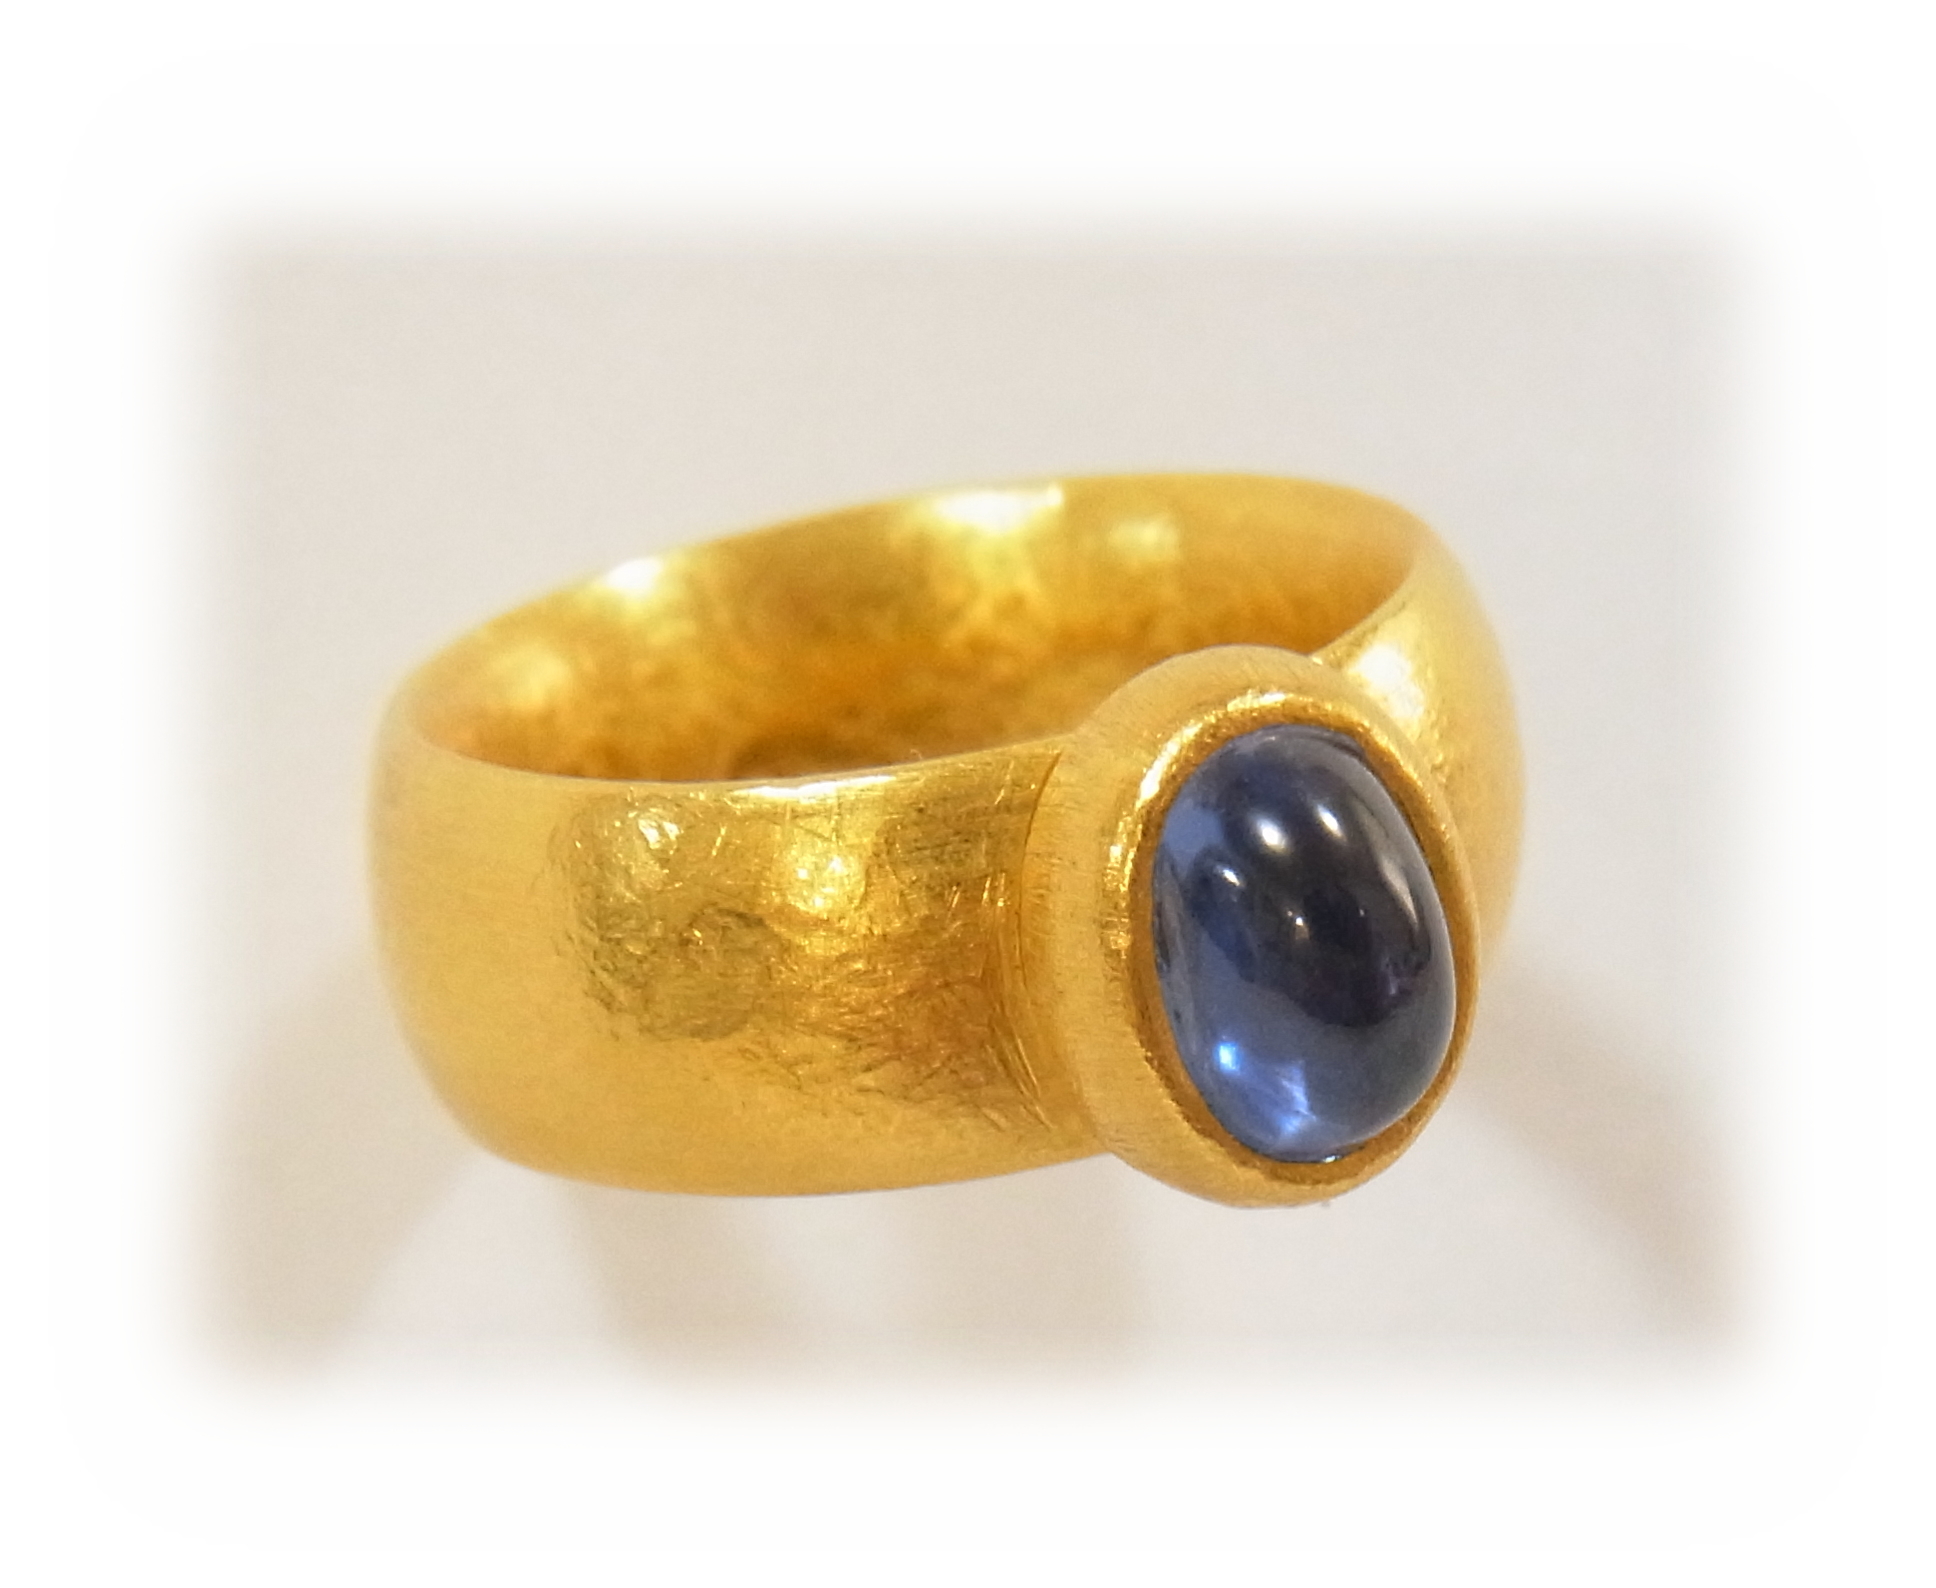 Handmade Jewelry by Nao goldwork: Cabochon blue Sapphire gold ring